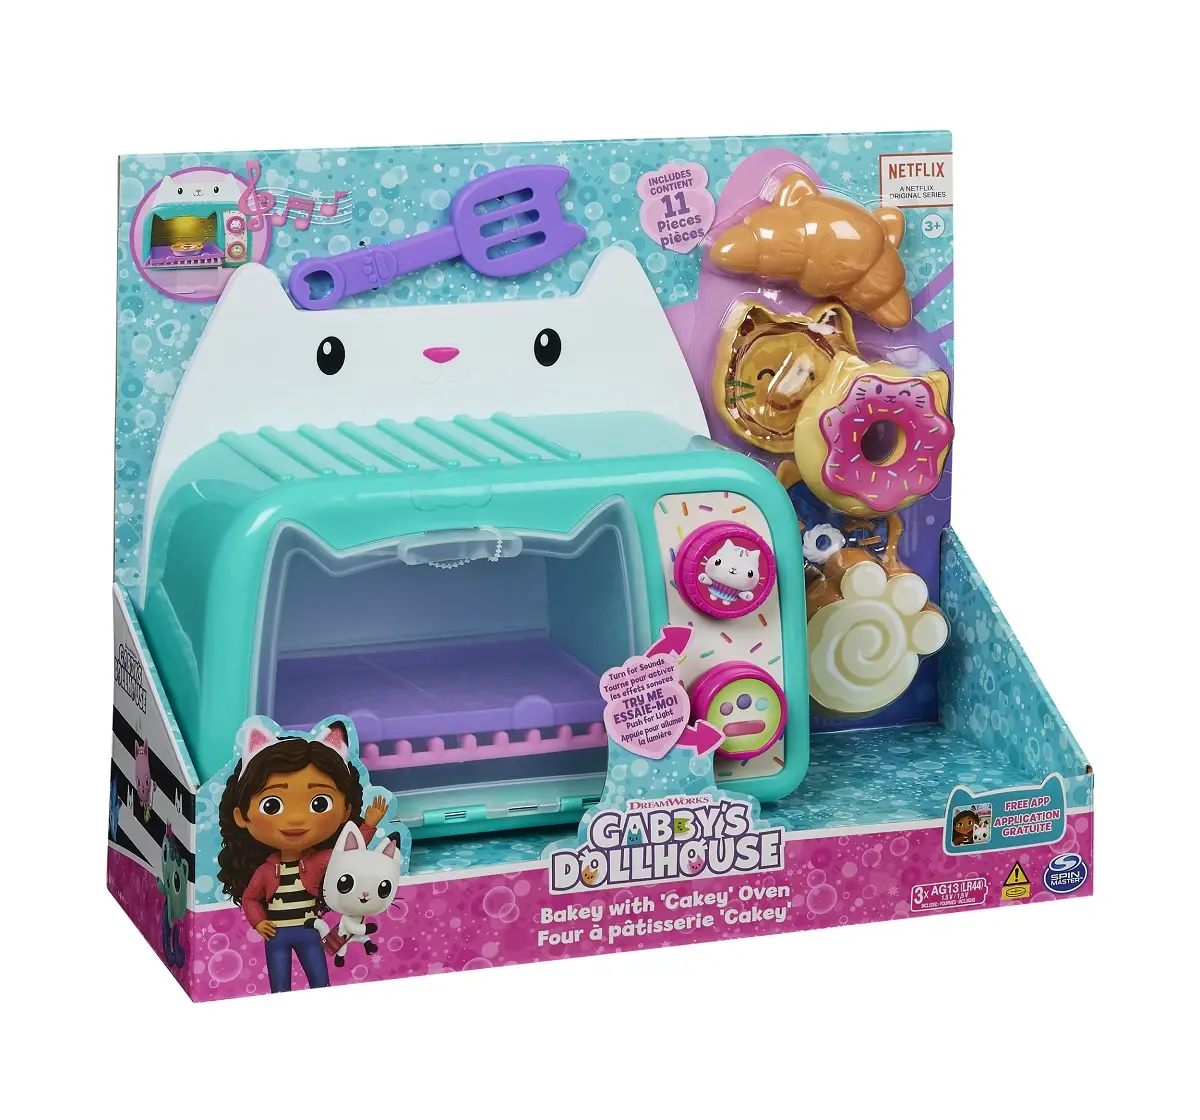 Gabbys Dollhouse, Bakey with Cakey Oven, Kitchen Toy with Lights and Sounds, Toy Kitchen Accessories and Play Food, Kids Toys for Ages 3 and up